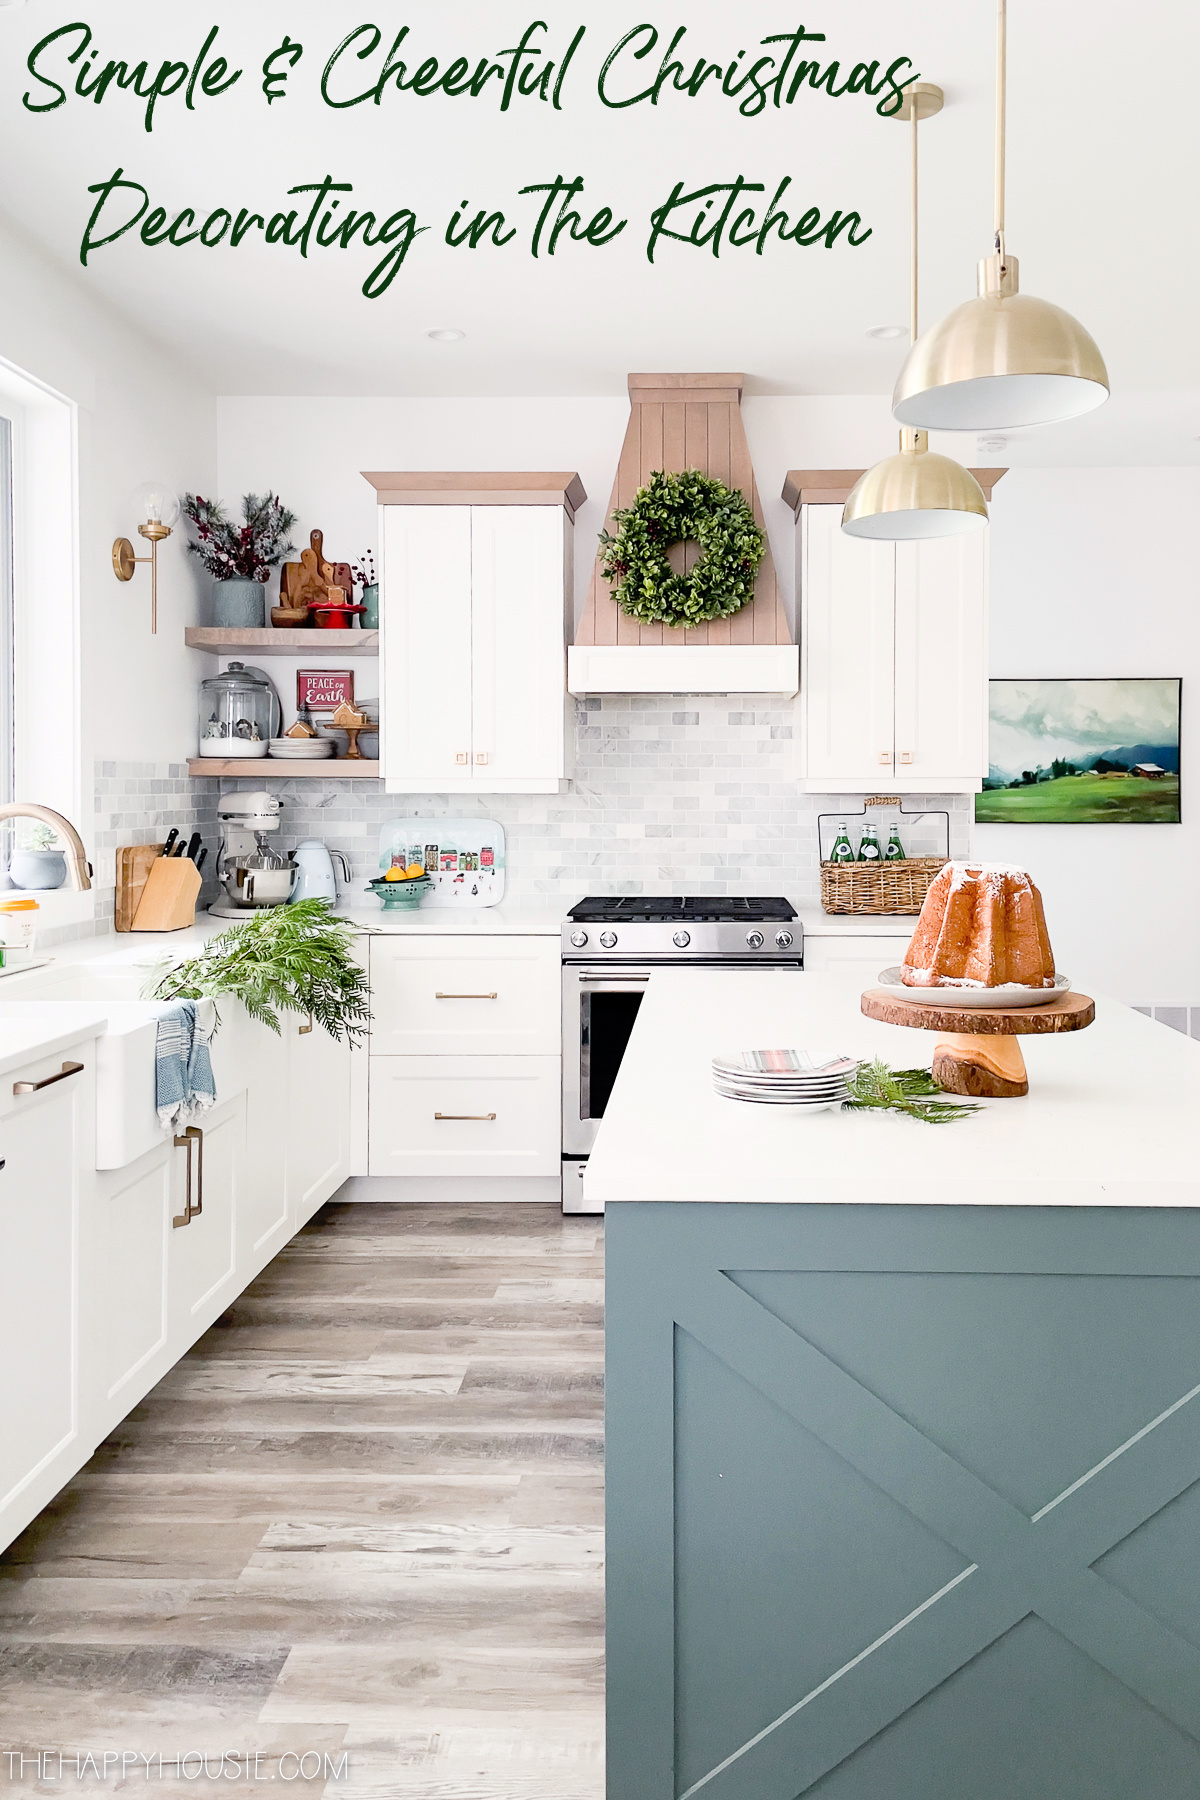 https://www.thehappyhousie.com/wp-content/uploads/2021/11/simple-and-cheerful-Christmas-decorating-in-the-kitchen.jpg